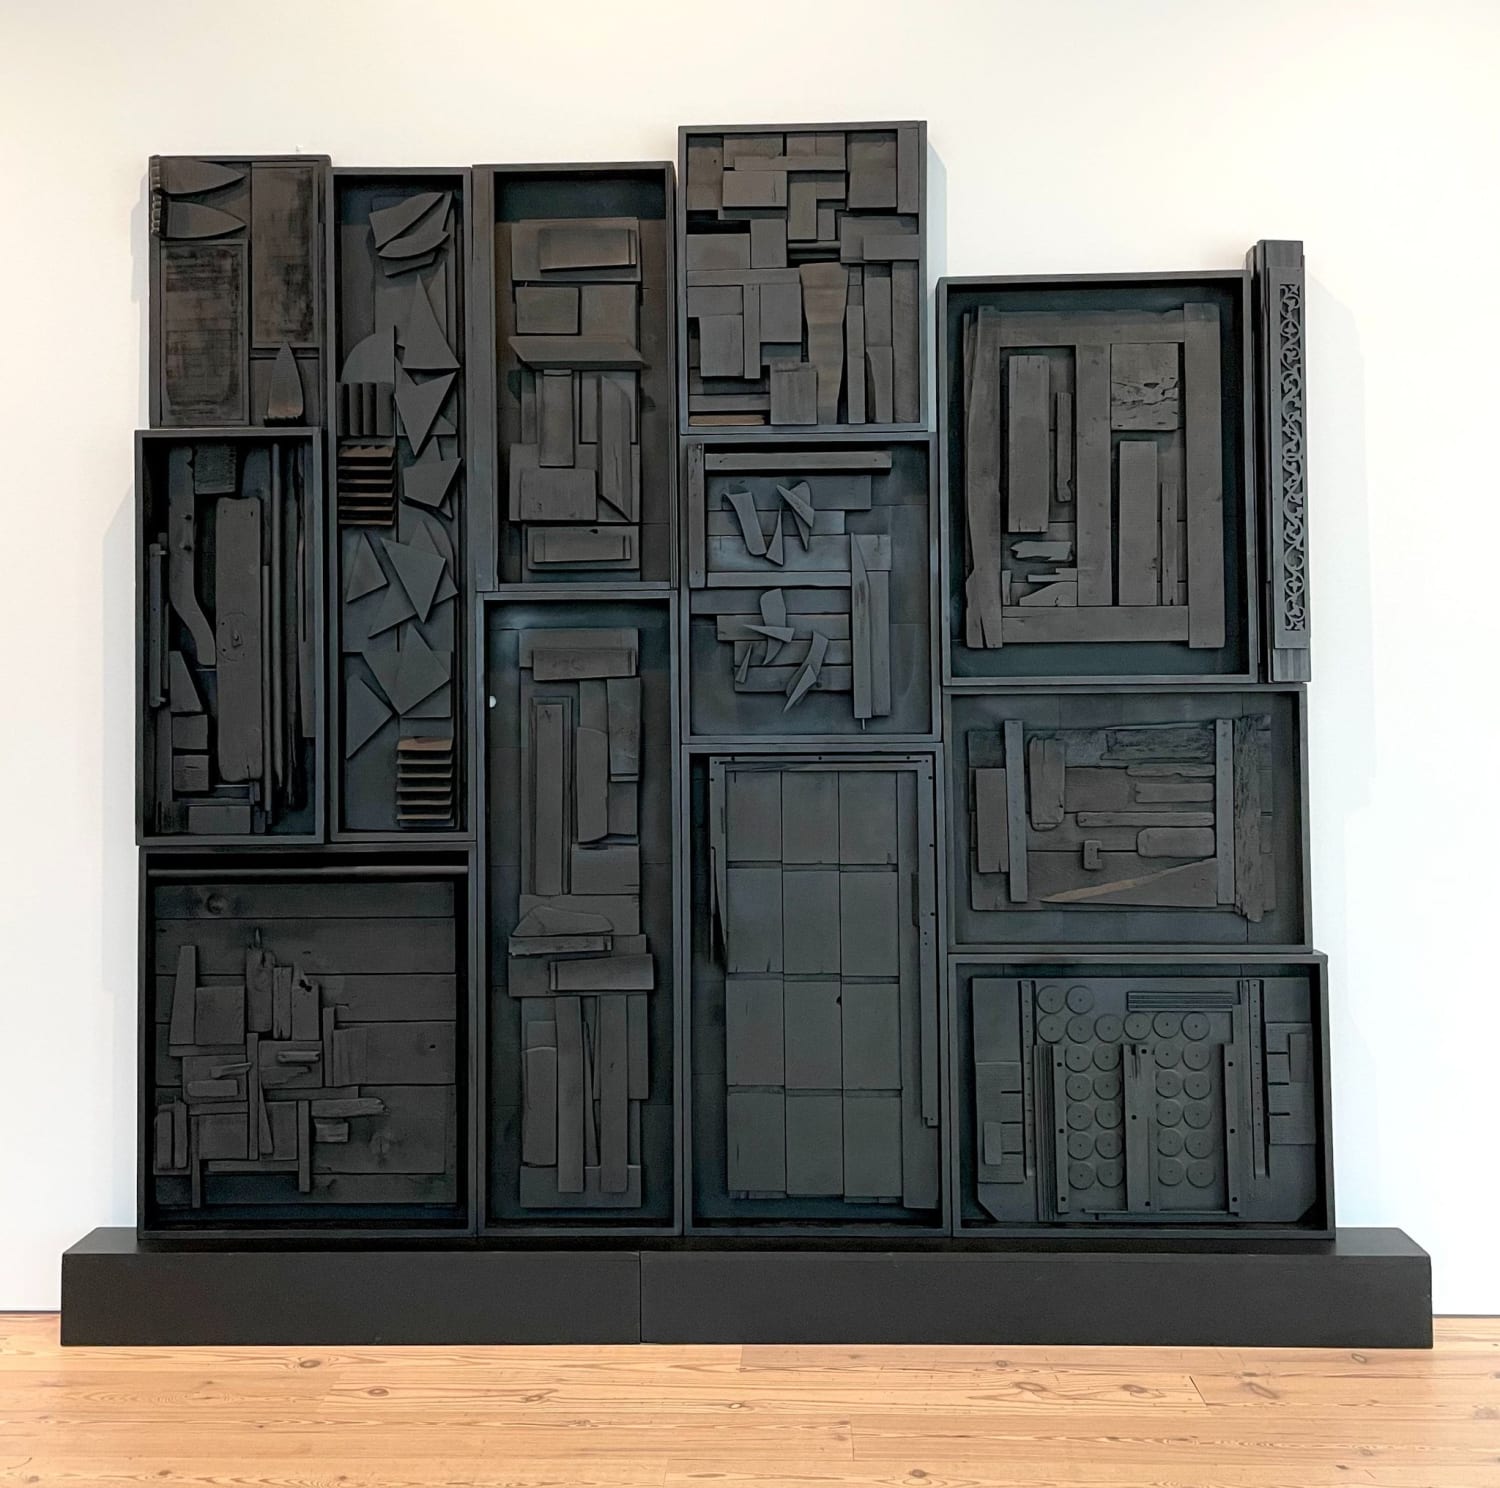 Happy birthday to LouiseNevelson, who was born onthisday in 1899! Her work Young Shadows (1959–60), acquired by the Whitney in 1962 (the first museum sale for Nevelson), is now on view in the Whitney’s Collection: Selections from 1900 to 1965.